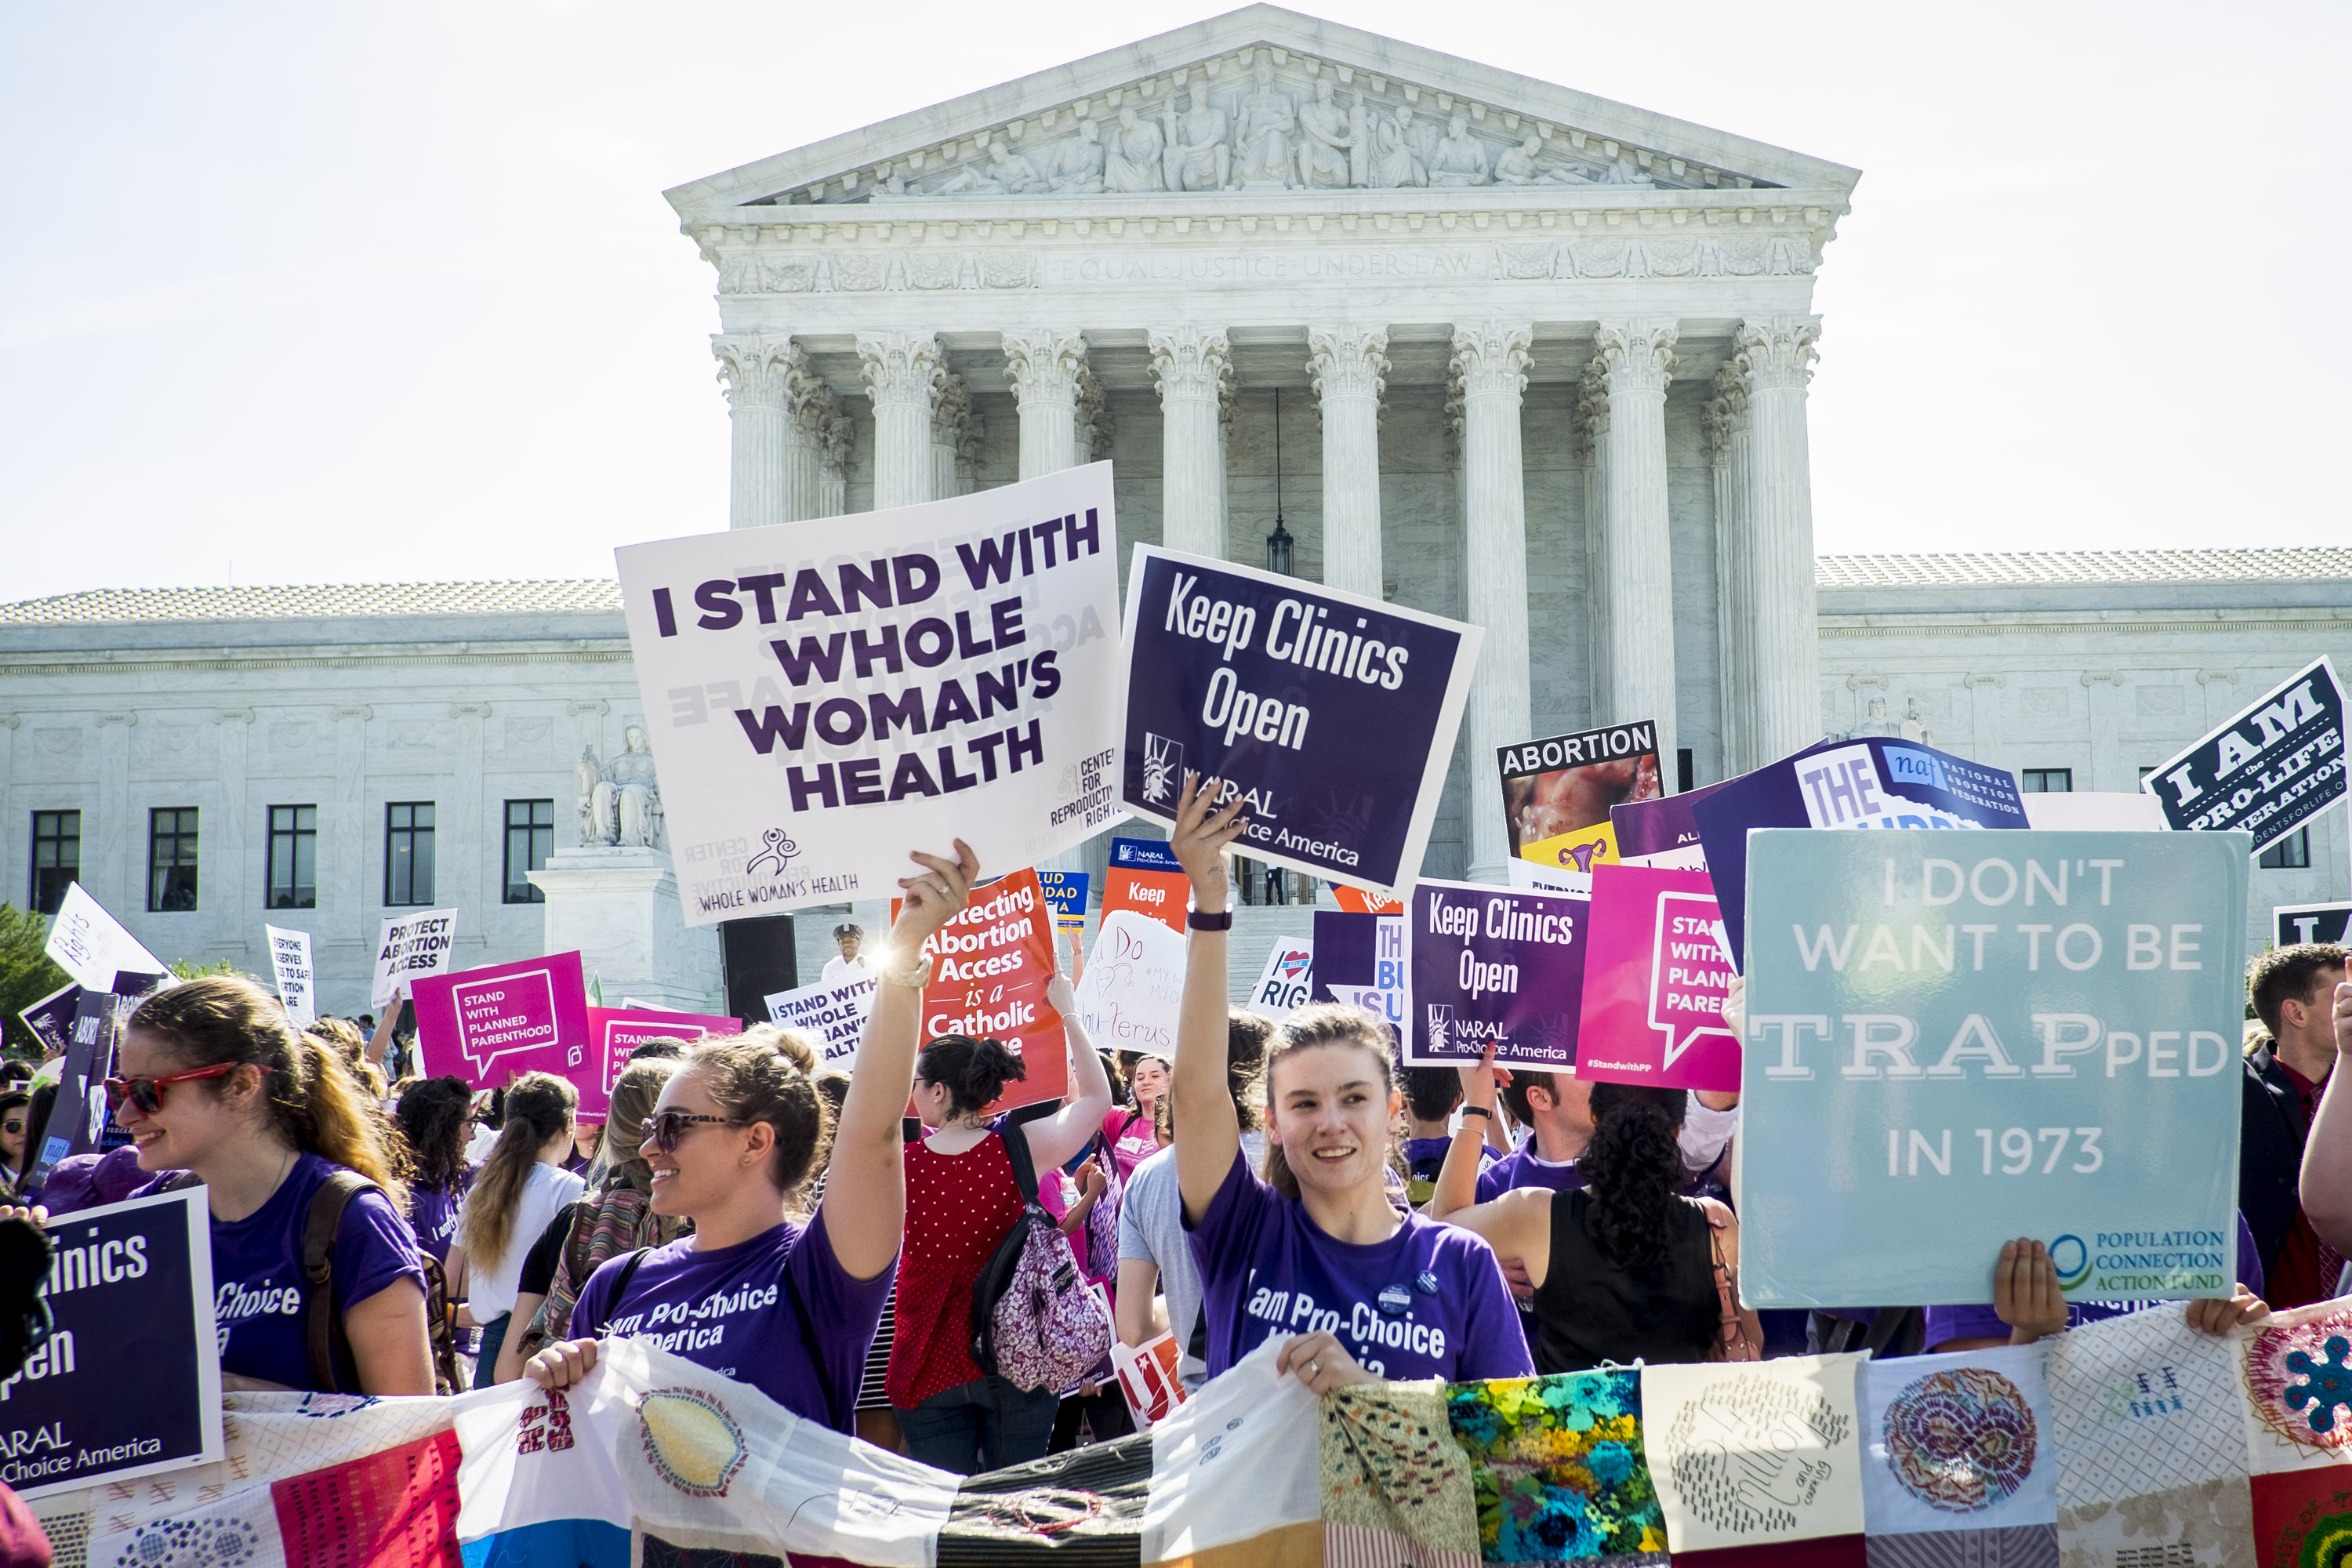 Pro-choice and pro-life activists demonstrate on the steps of the United States Supreme Court in Washington, D.C. on June 27, 2016.